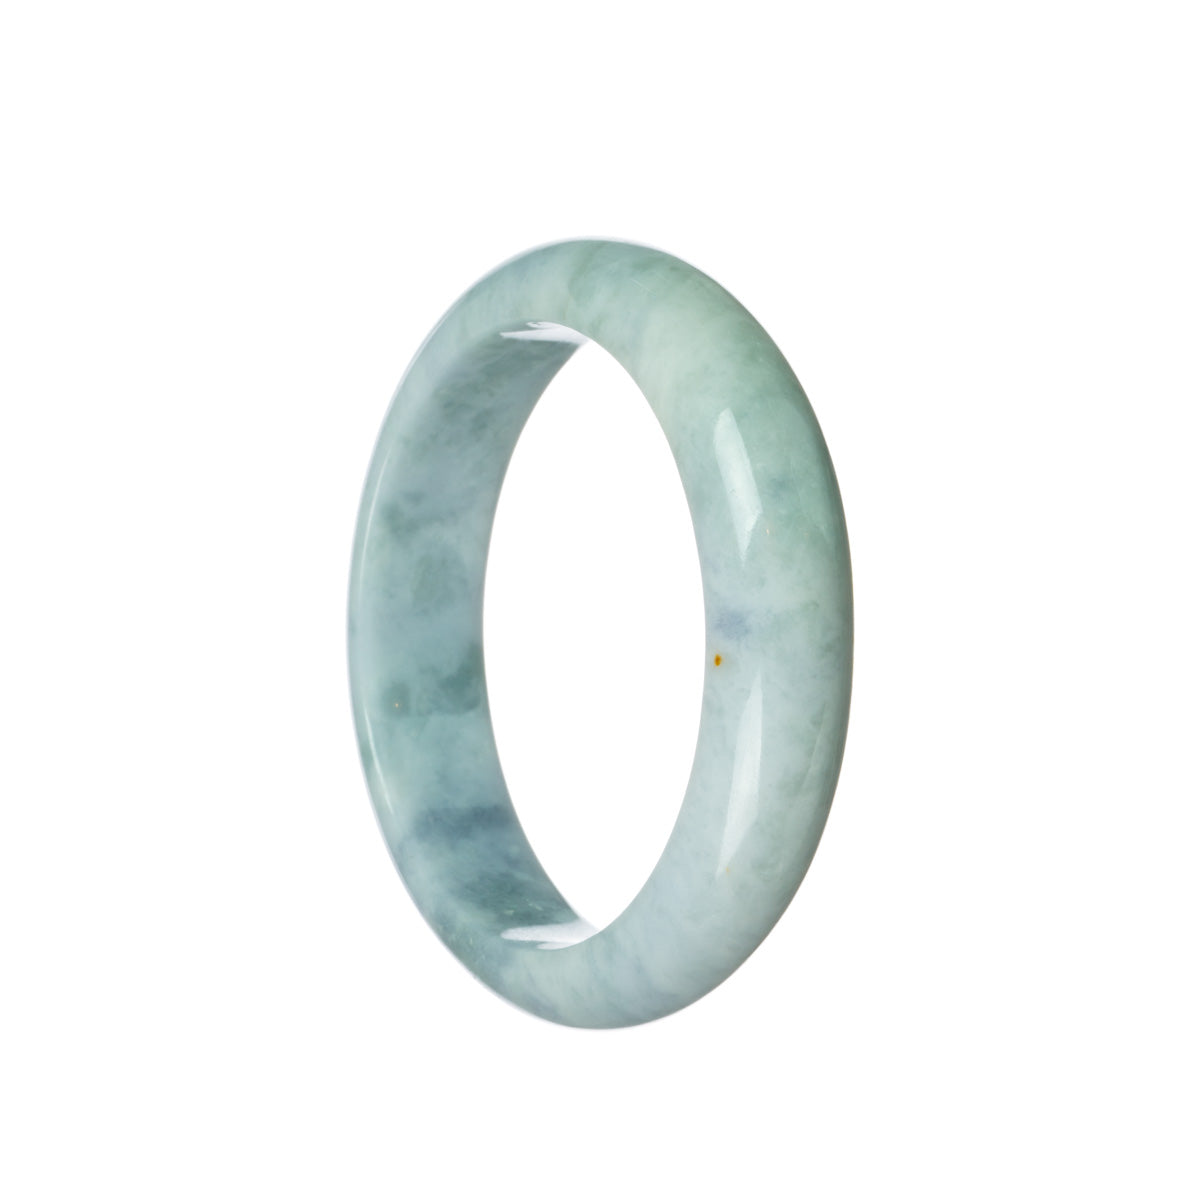 A beautiful half moon-shaped lavender jadeite bangle, certified as Grade A quality by MAYS GEMS.